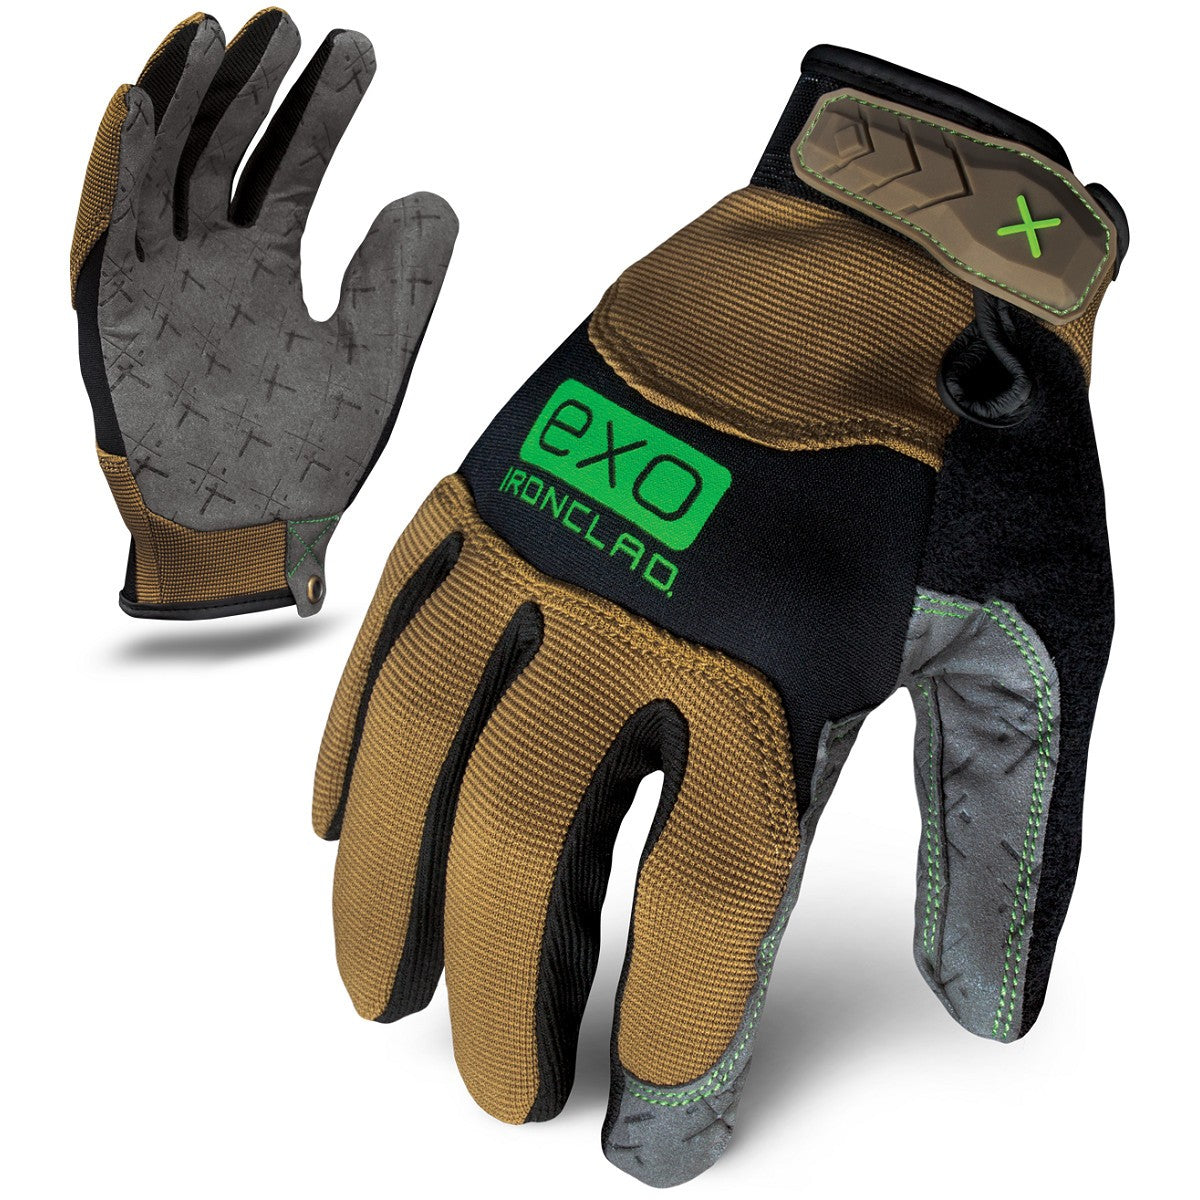 Ironclad EXO-PPG Project Pro Gloves